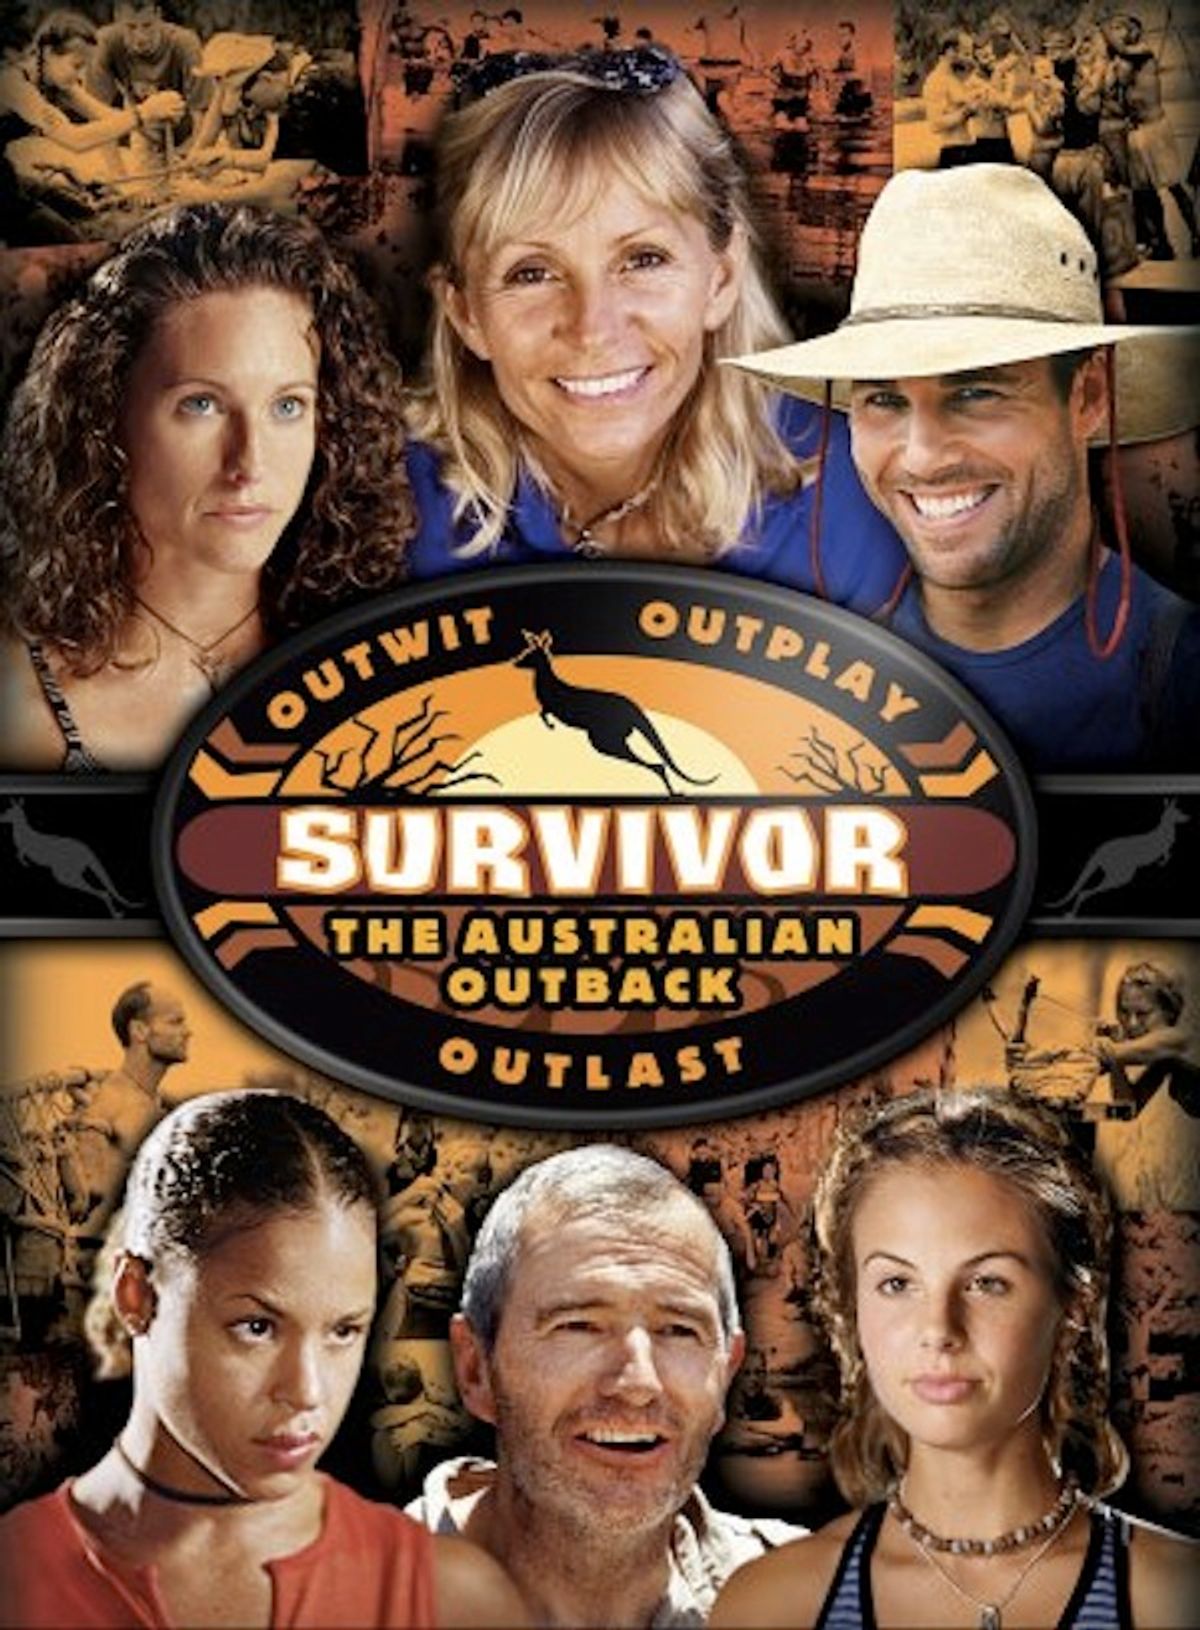 Did "Survivor" stall the writers strike of 2001?